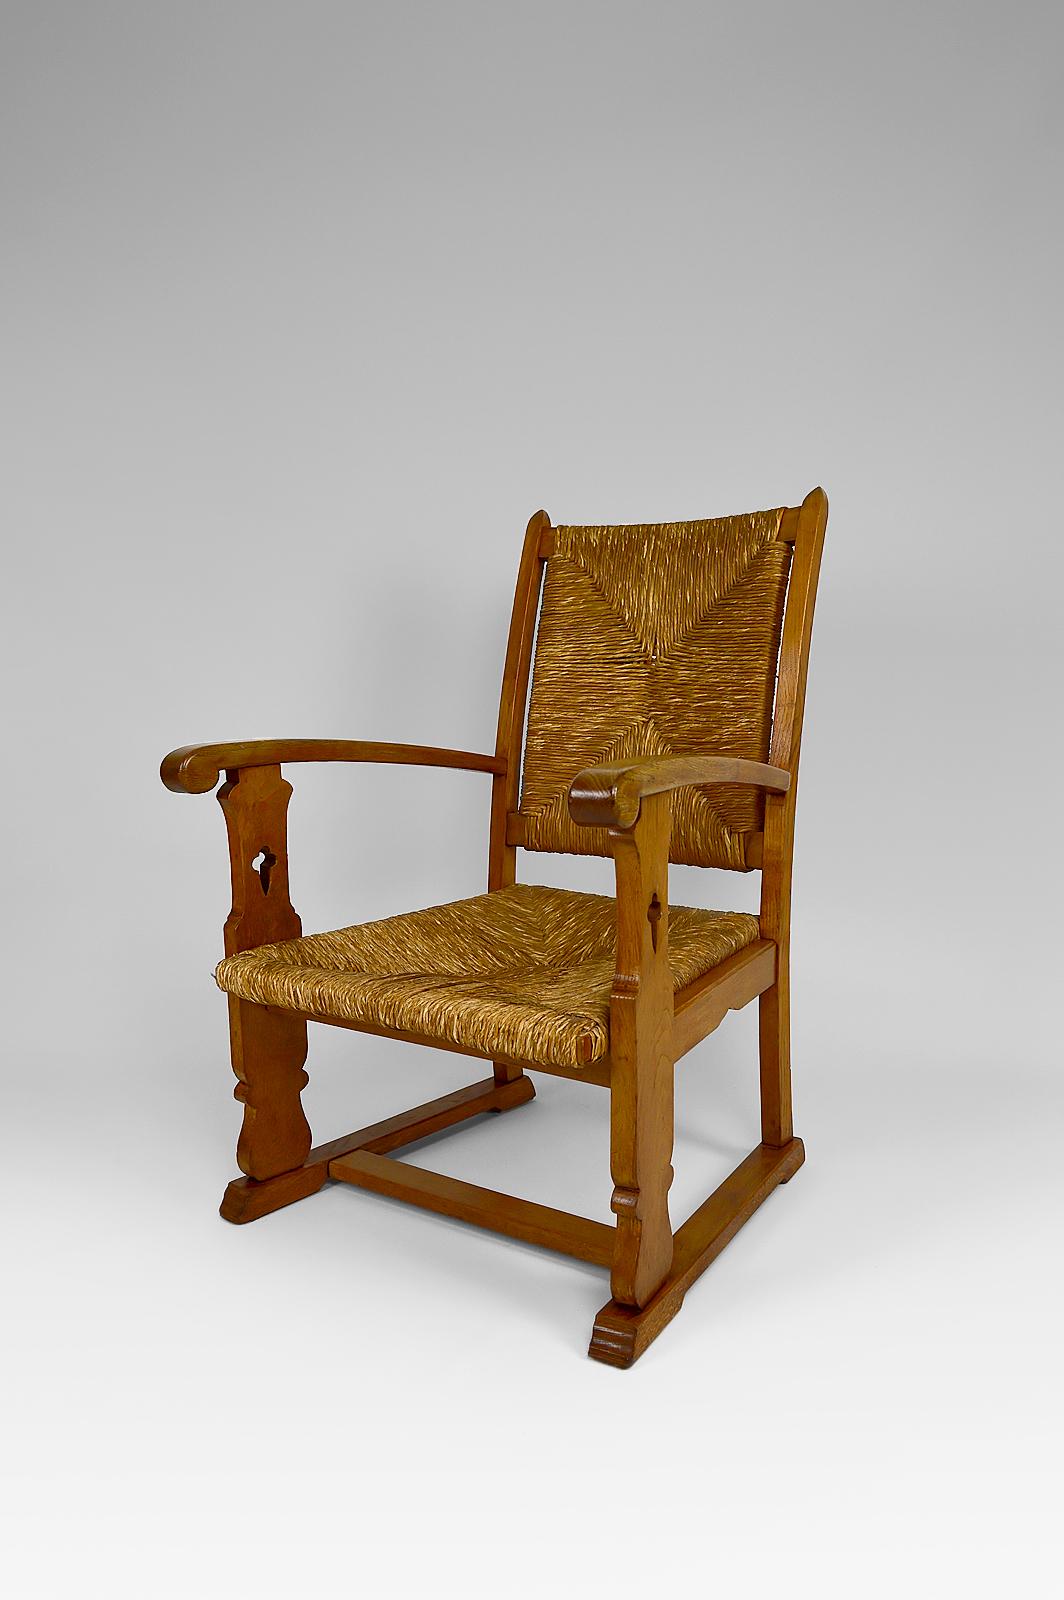 Beautiful armchair with oak structure ans straw backrest and seat.

Art & Crafts / Gothic Revival style, United-Kingdom or Netherlands, circa 1900/1910.

In good condition.
Restored : structure cleaned, treated and waxed.

Dimensions :
Height